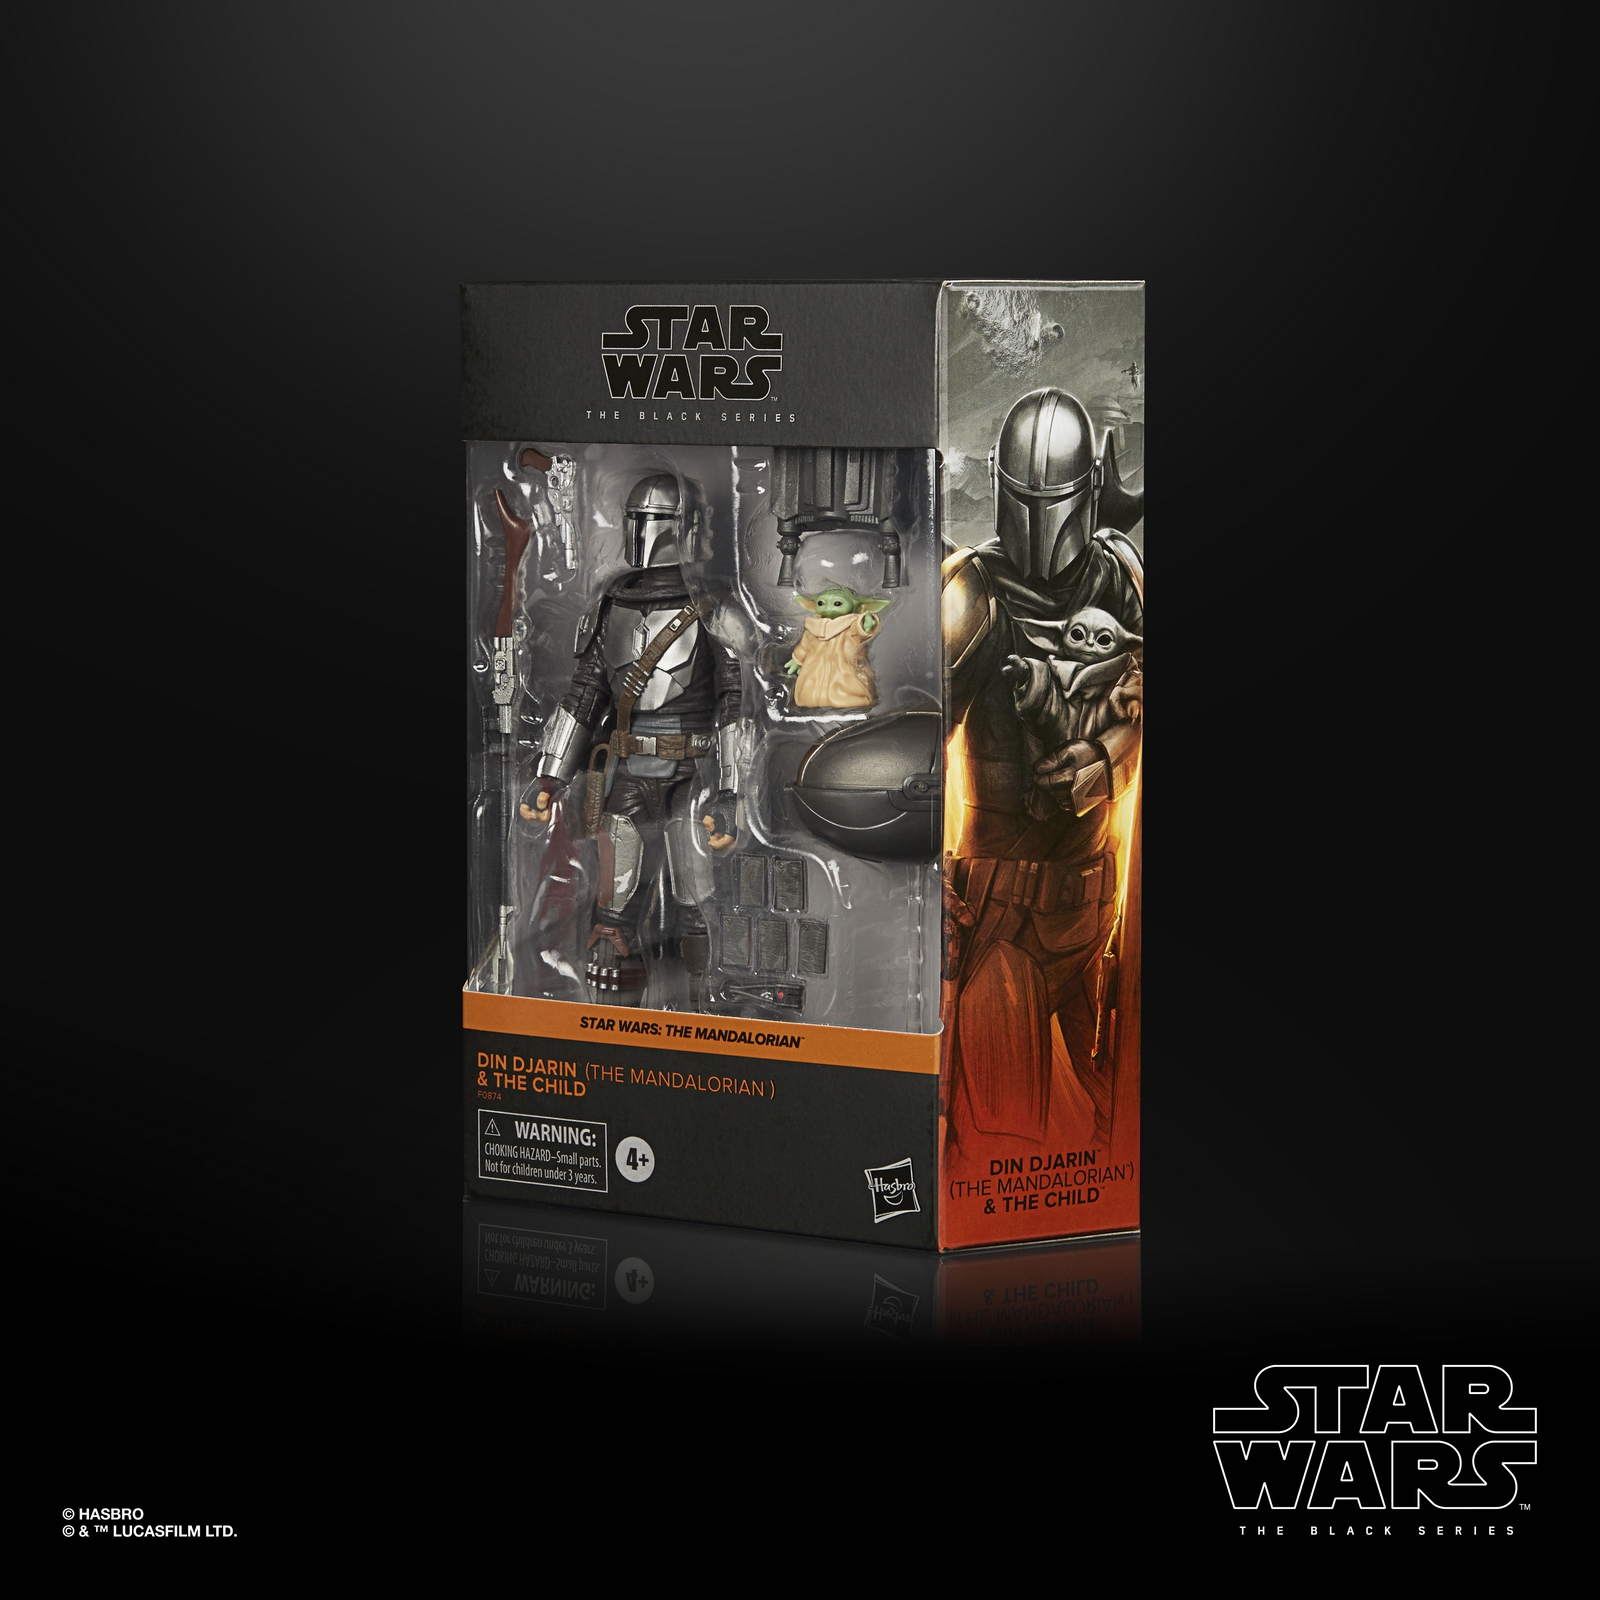 STAR WARS THE BLACK SERIES 6-INCH DIN DJARIN (THE MANDALORIAN) & THE CHILD BUILD-UP PACK - in pck (1).jpg